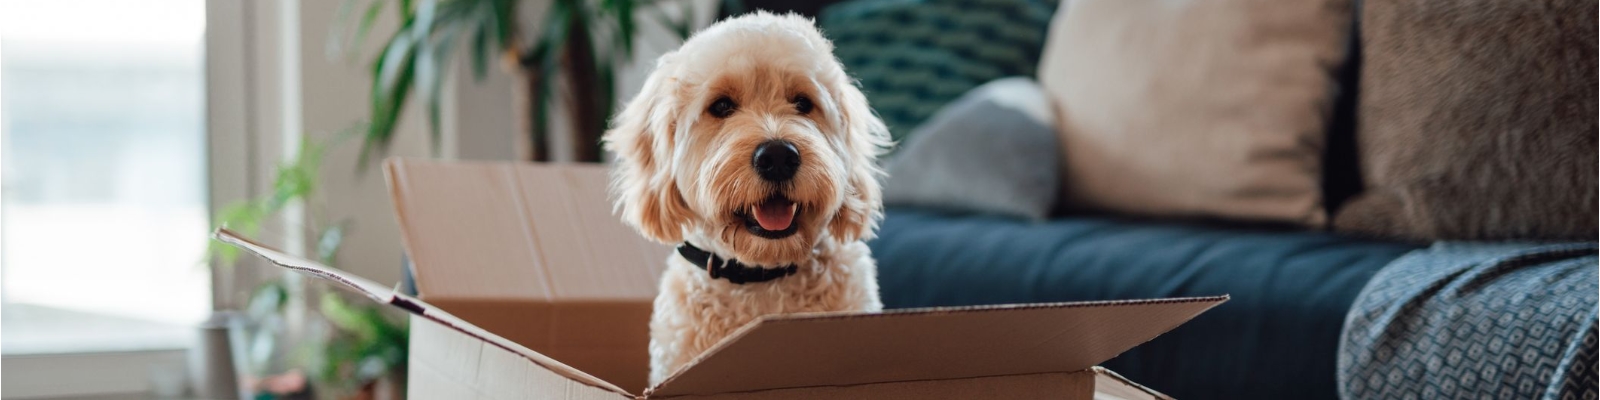 Dog sitting in moving box
Mortgage Loans